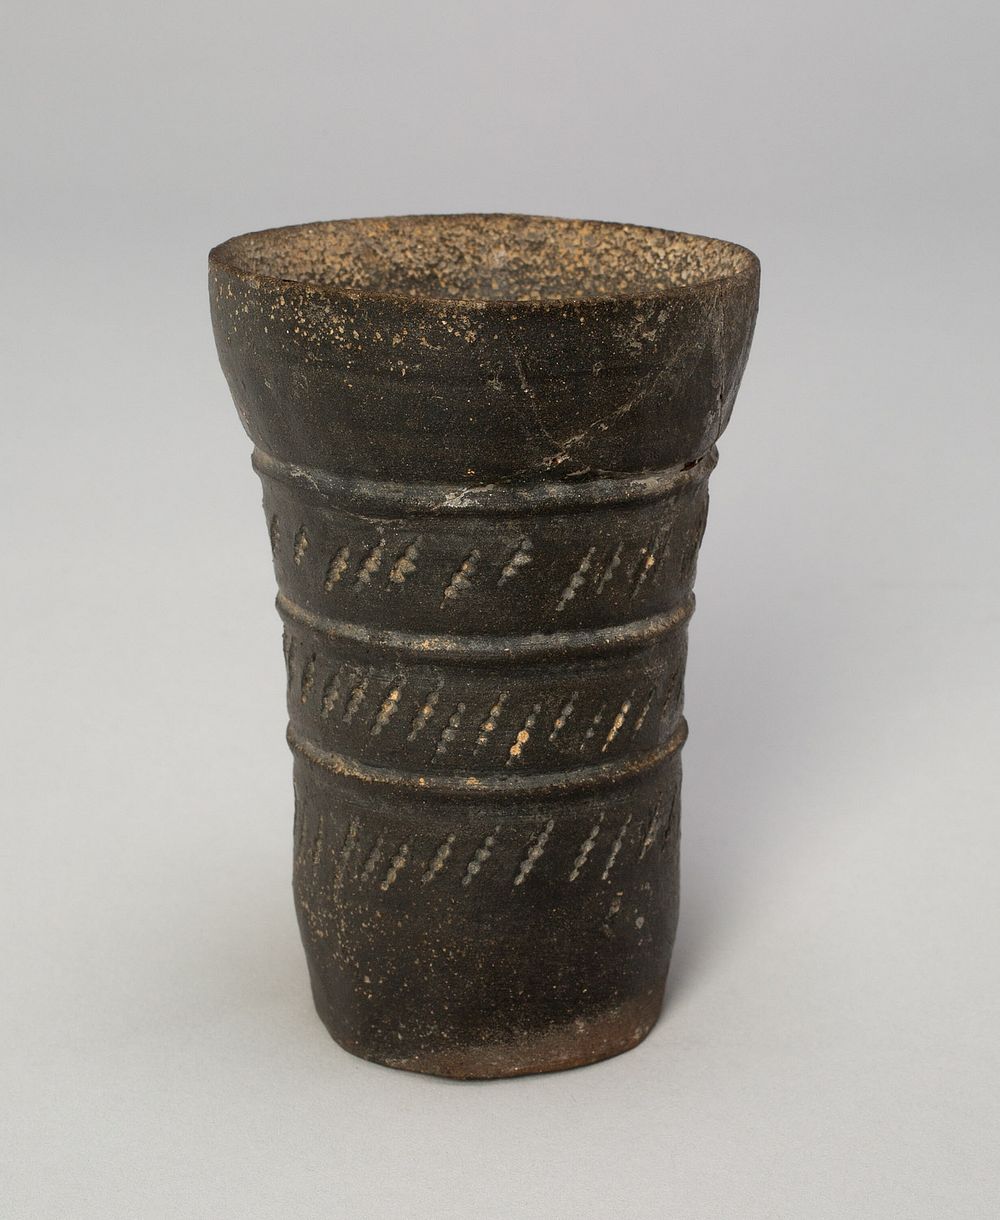 Tall Cup with Diagonal Slashes